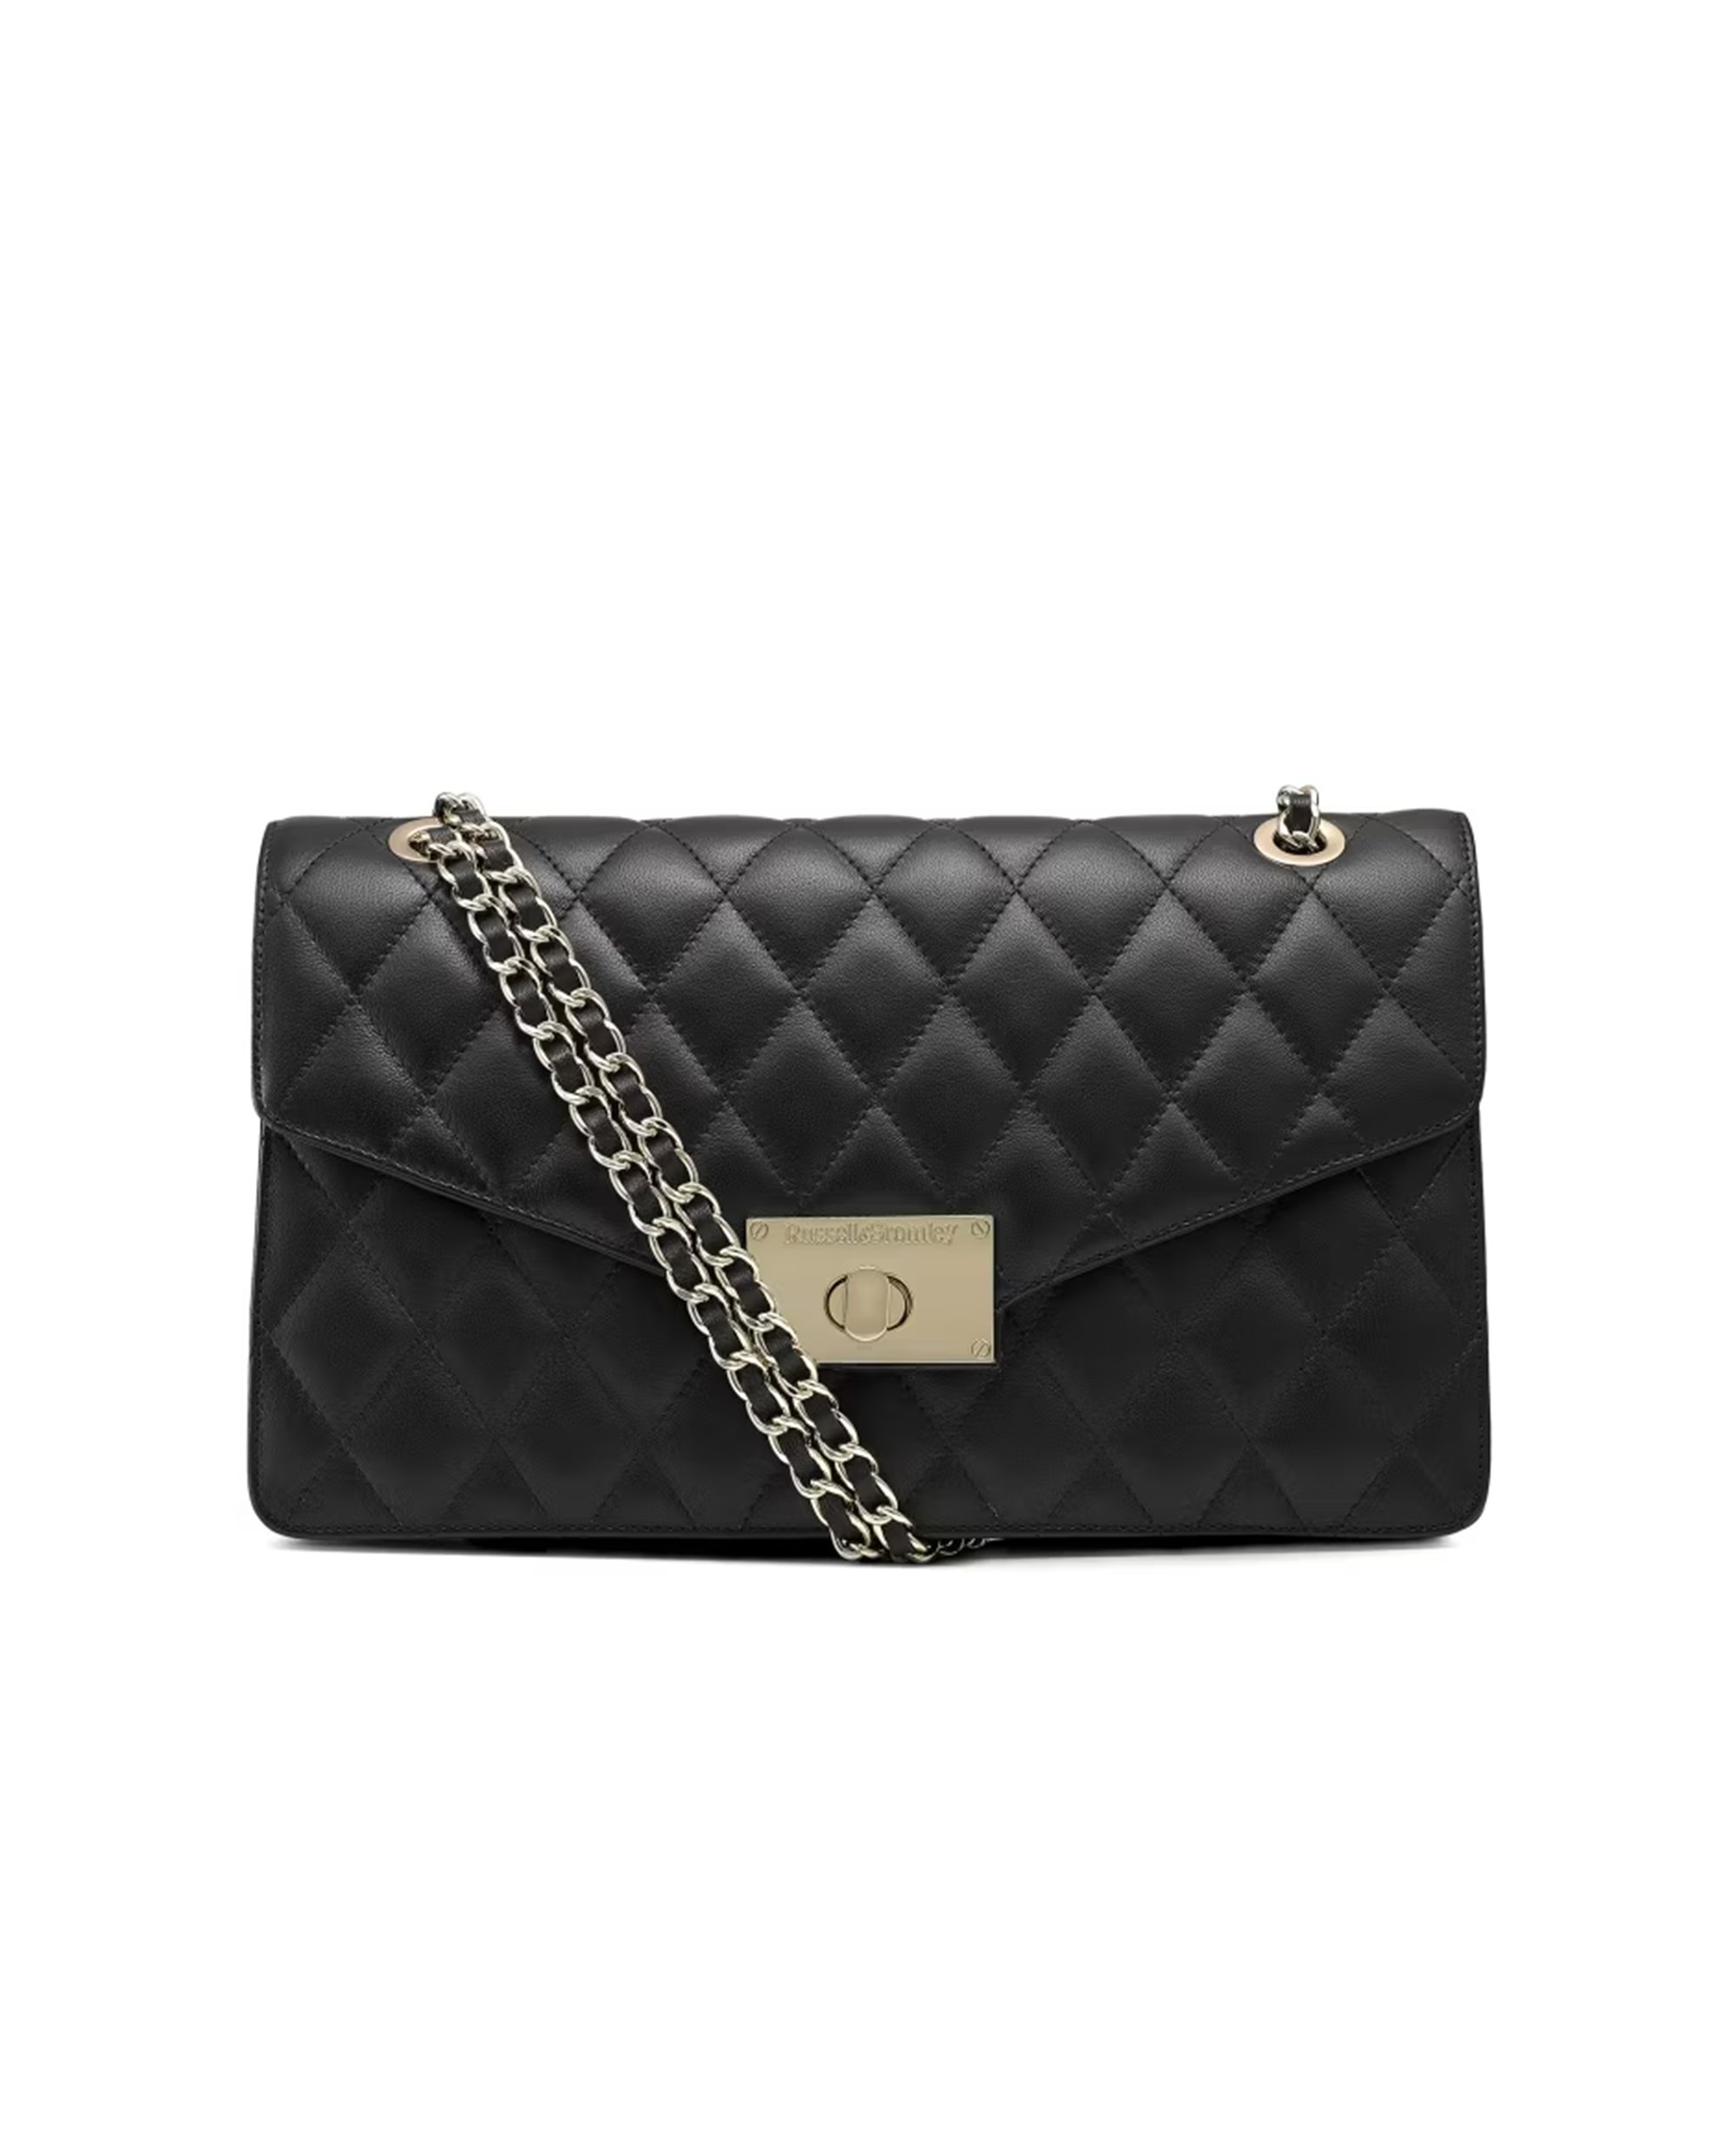 8 Chanel Dupes You Absolutely Have To See